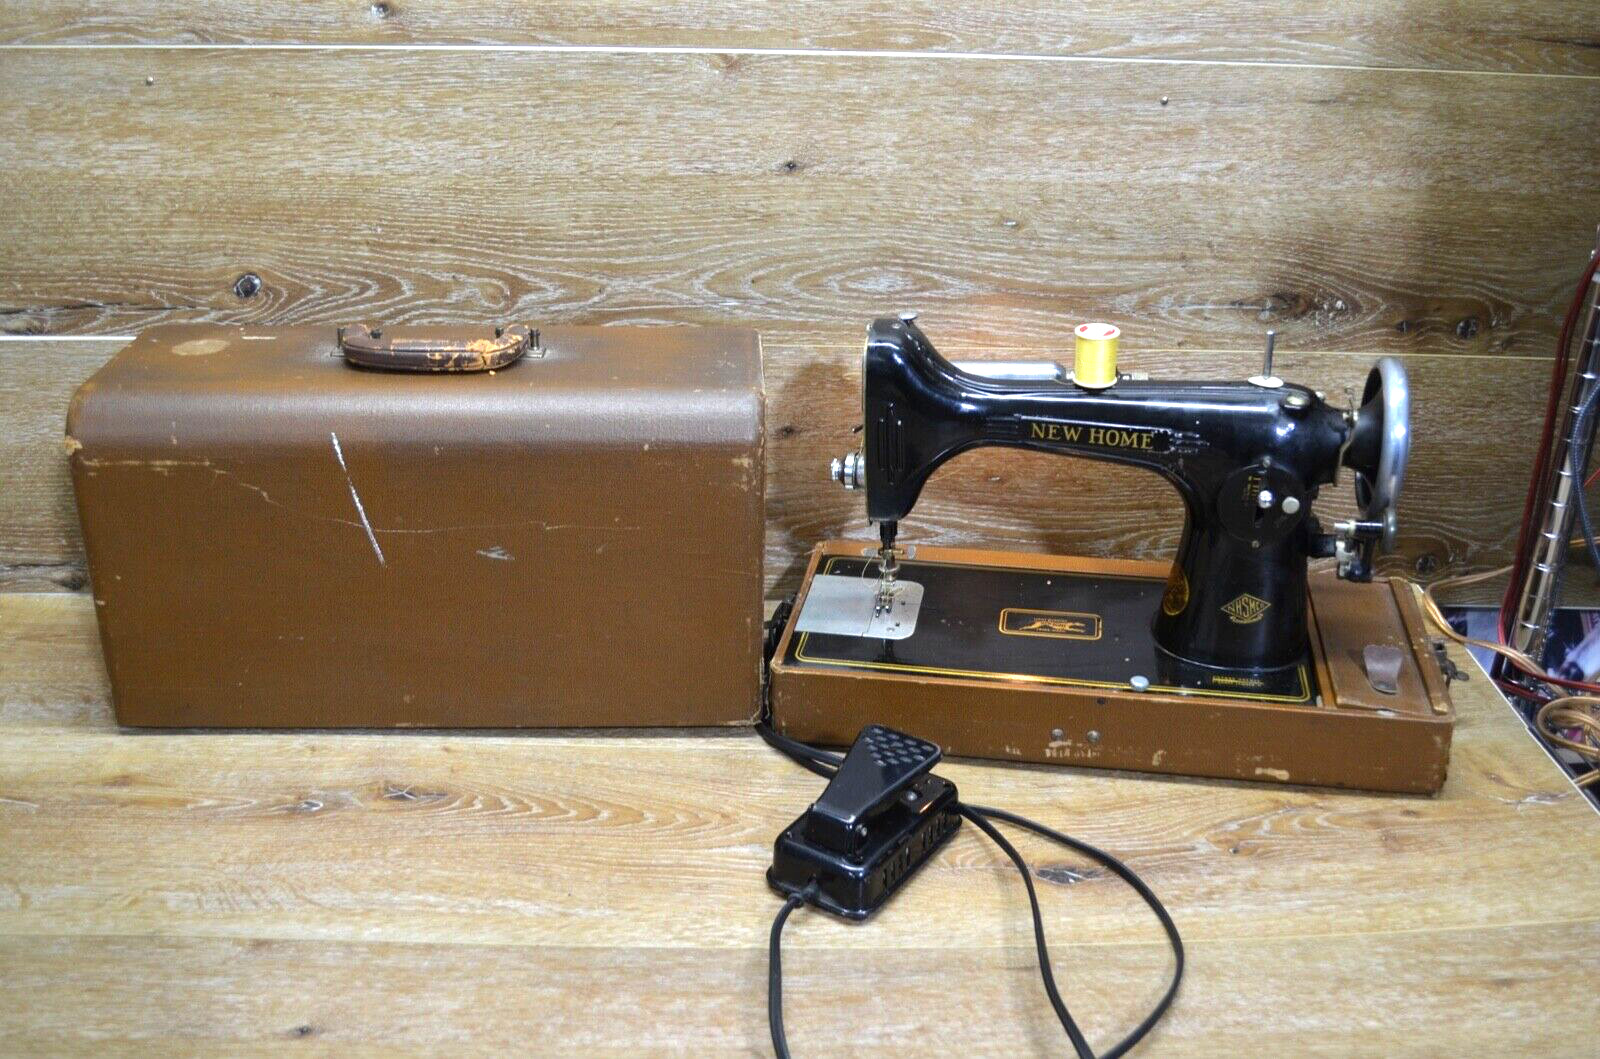 VINTAGE WESTINGHOUSE NEW HOME SEWING MACHINE 955901-E